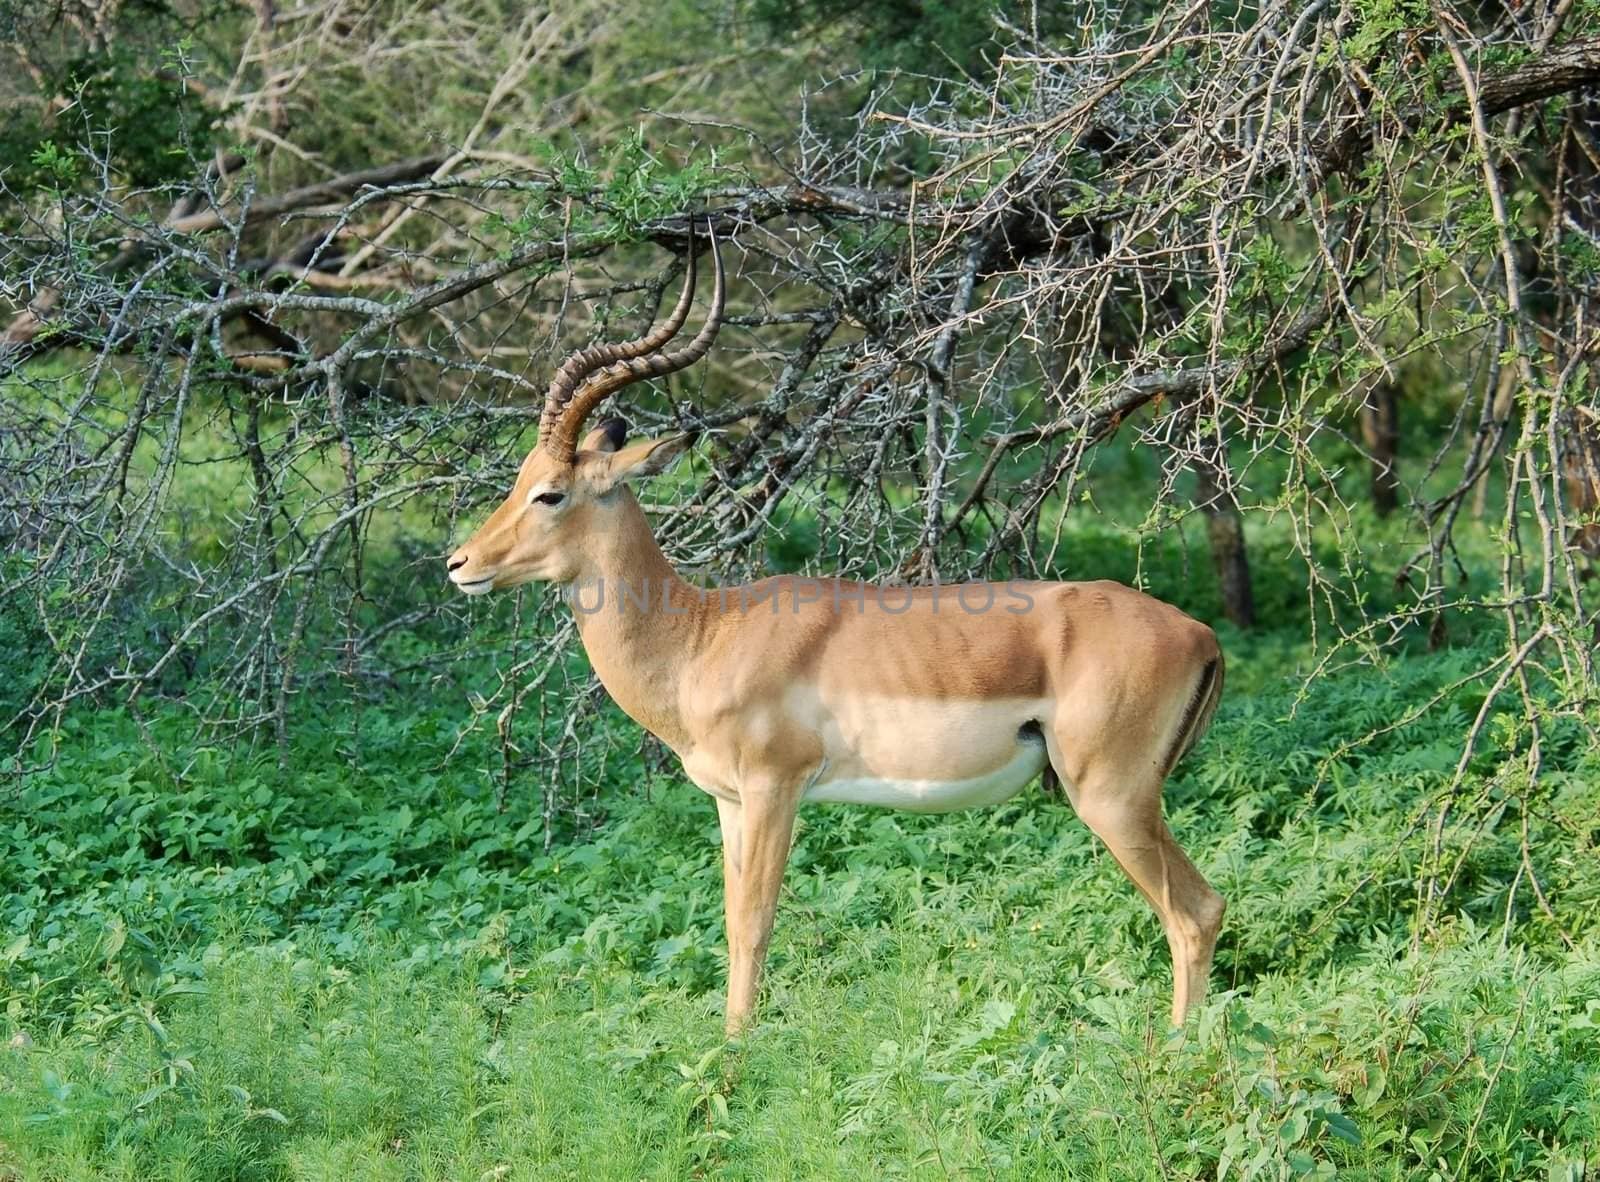 Male Impala Antelope (Aepyceros Melampus) in the Kruger Park, South Africa.